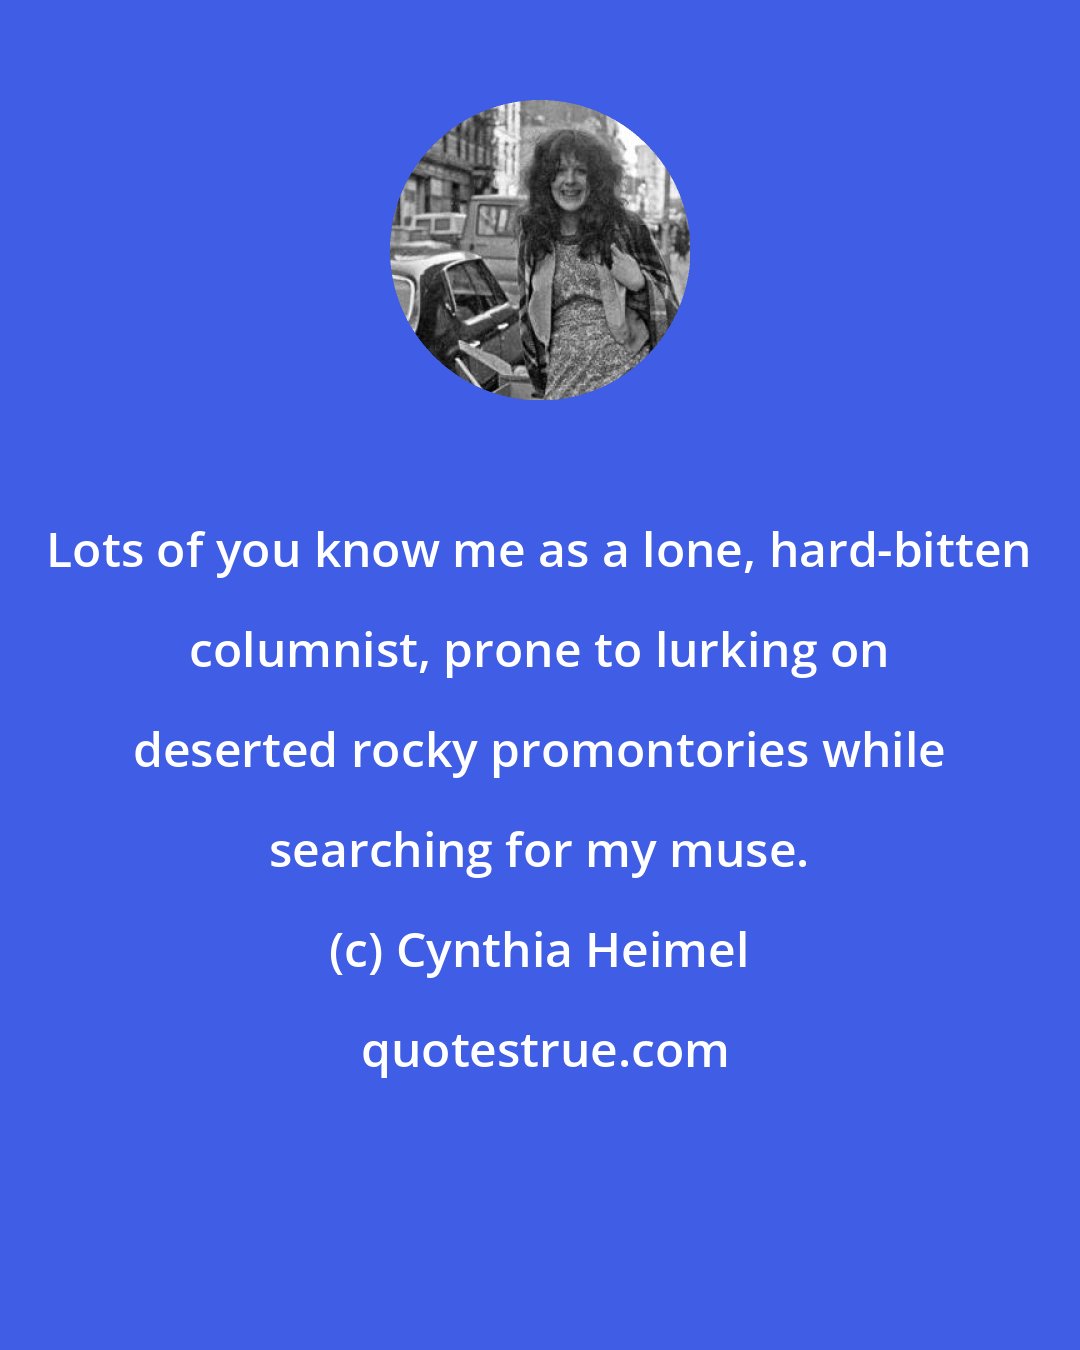 Cynthia Heimel: Lots of you know me as a lone, hard-bitten columnist, prone to lurking on deserted rocky promontories while searching for my muse.